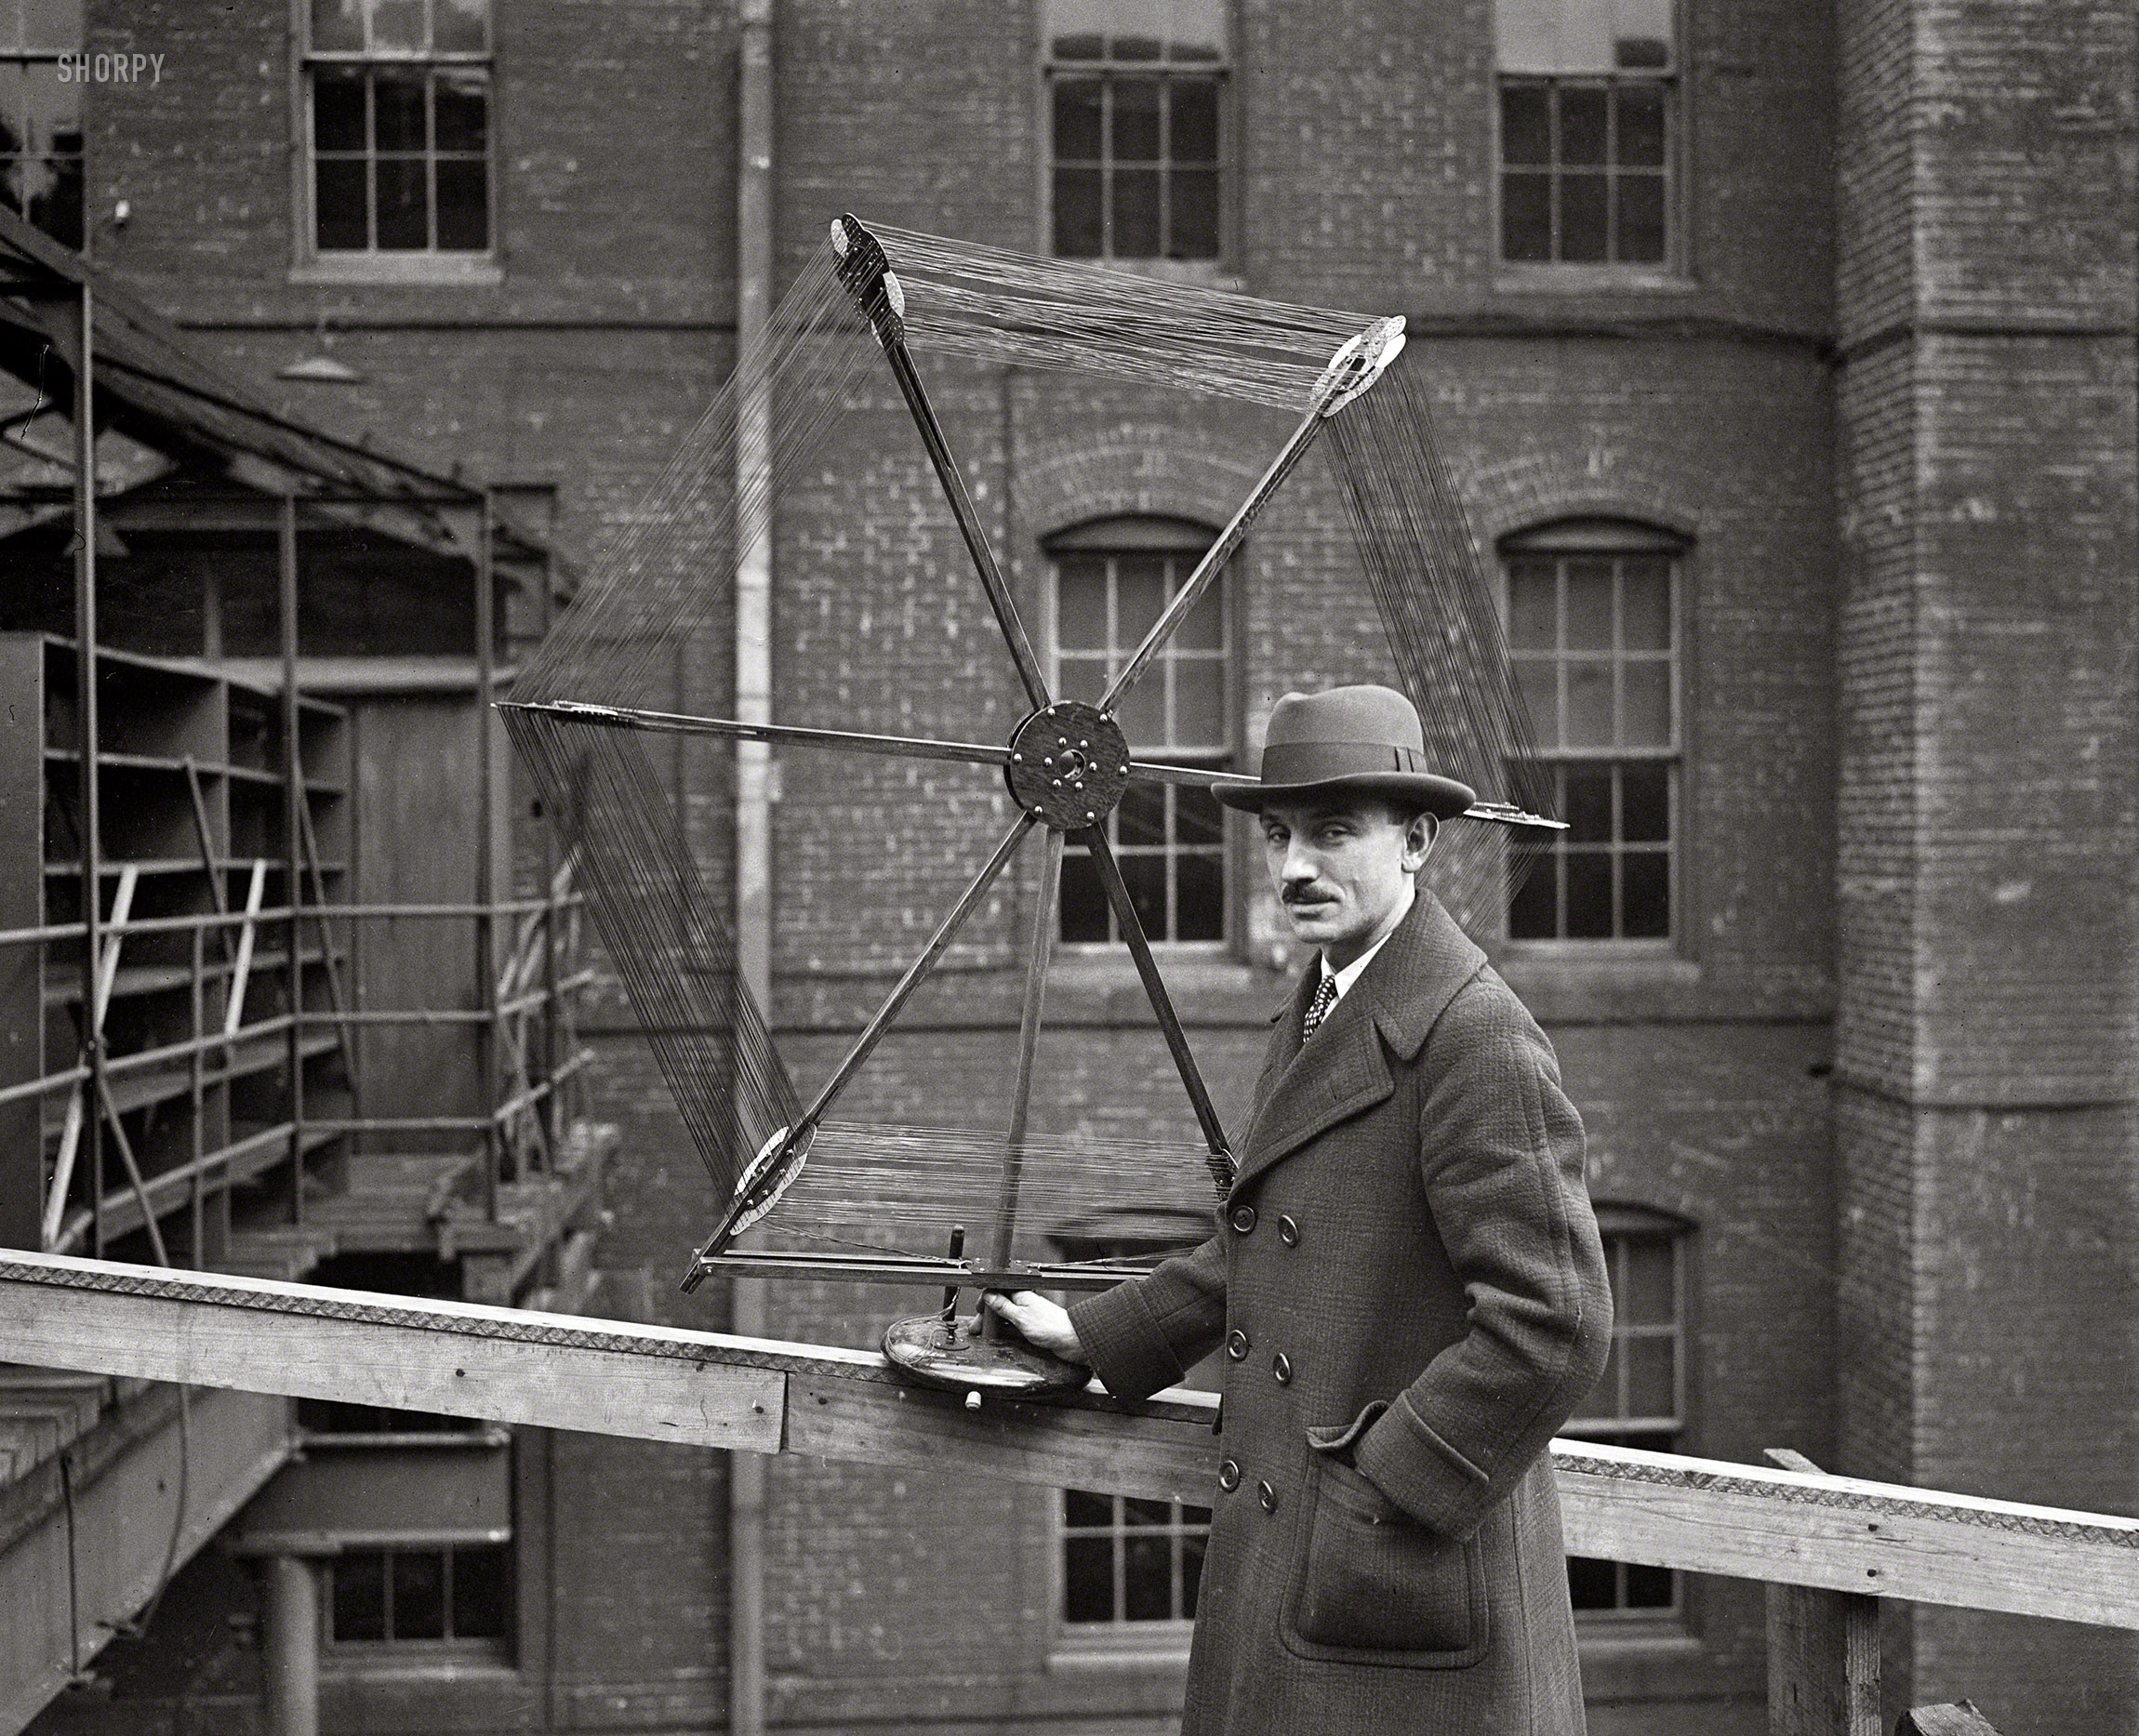 1924. Washington, D.C. "In recognition of his having conducted the most successful radio exhibition in the U.S., Alfred Stern, director of Washington's first radio exposition, was presented with this elaborate loop antenna by Dr. J. Harris Rogers, famous inventor. It is estimated that 50,000 persons attended this exhibition." Harris & Ewing glass negative. View full size.